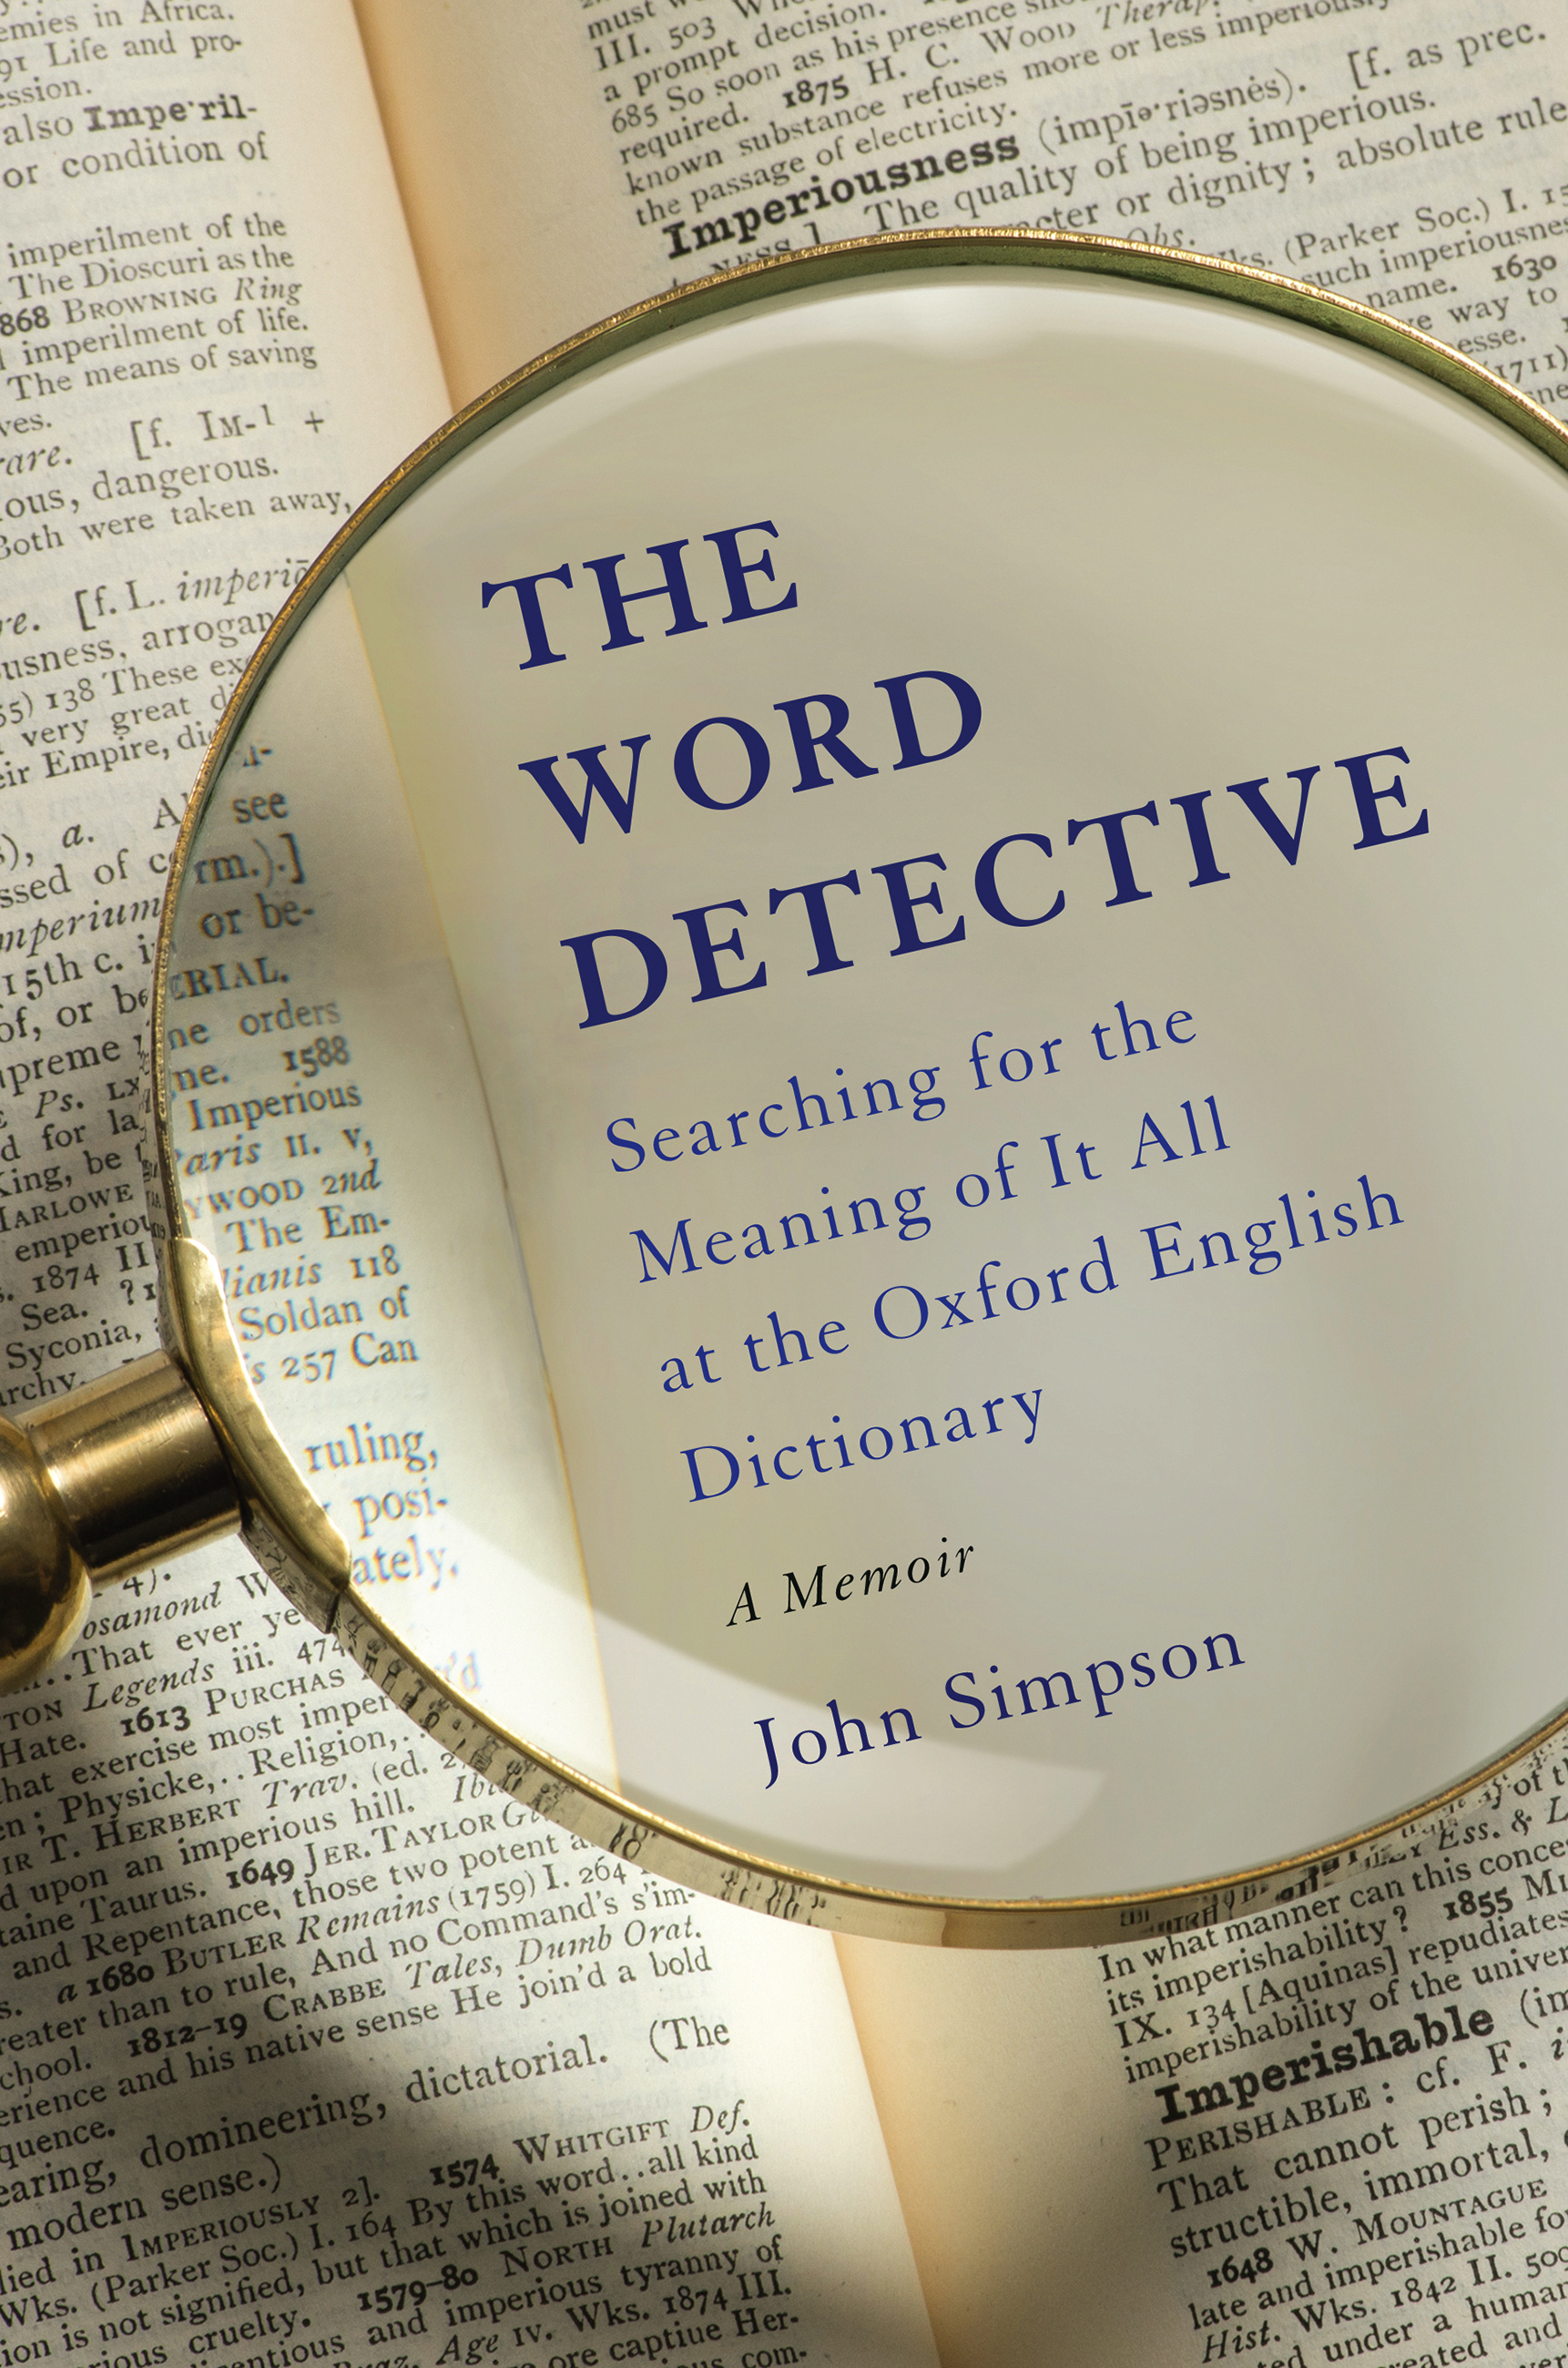 Group　Hachette　John　Detective　by　Simpson　Book　The　Word